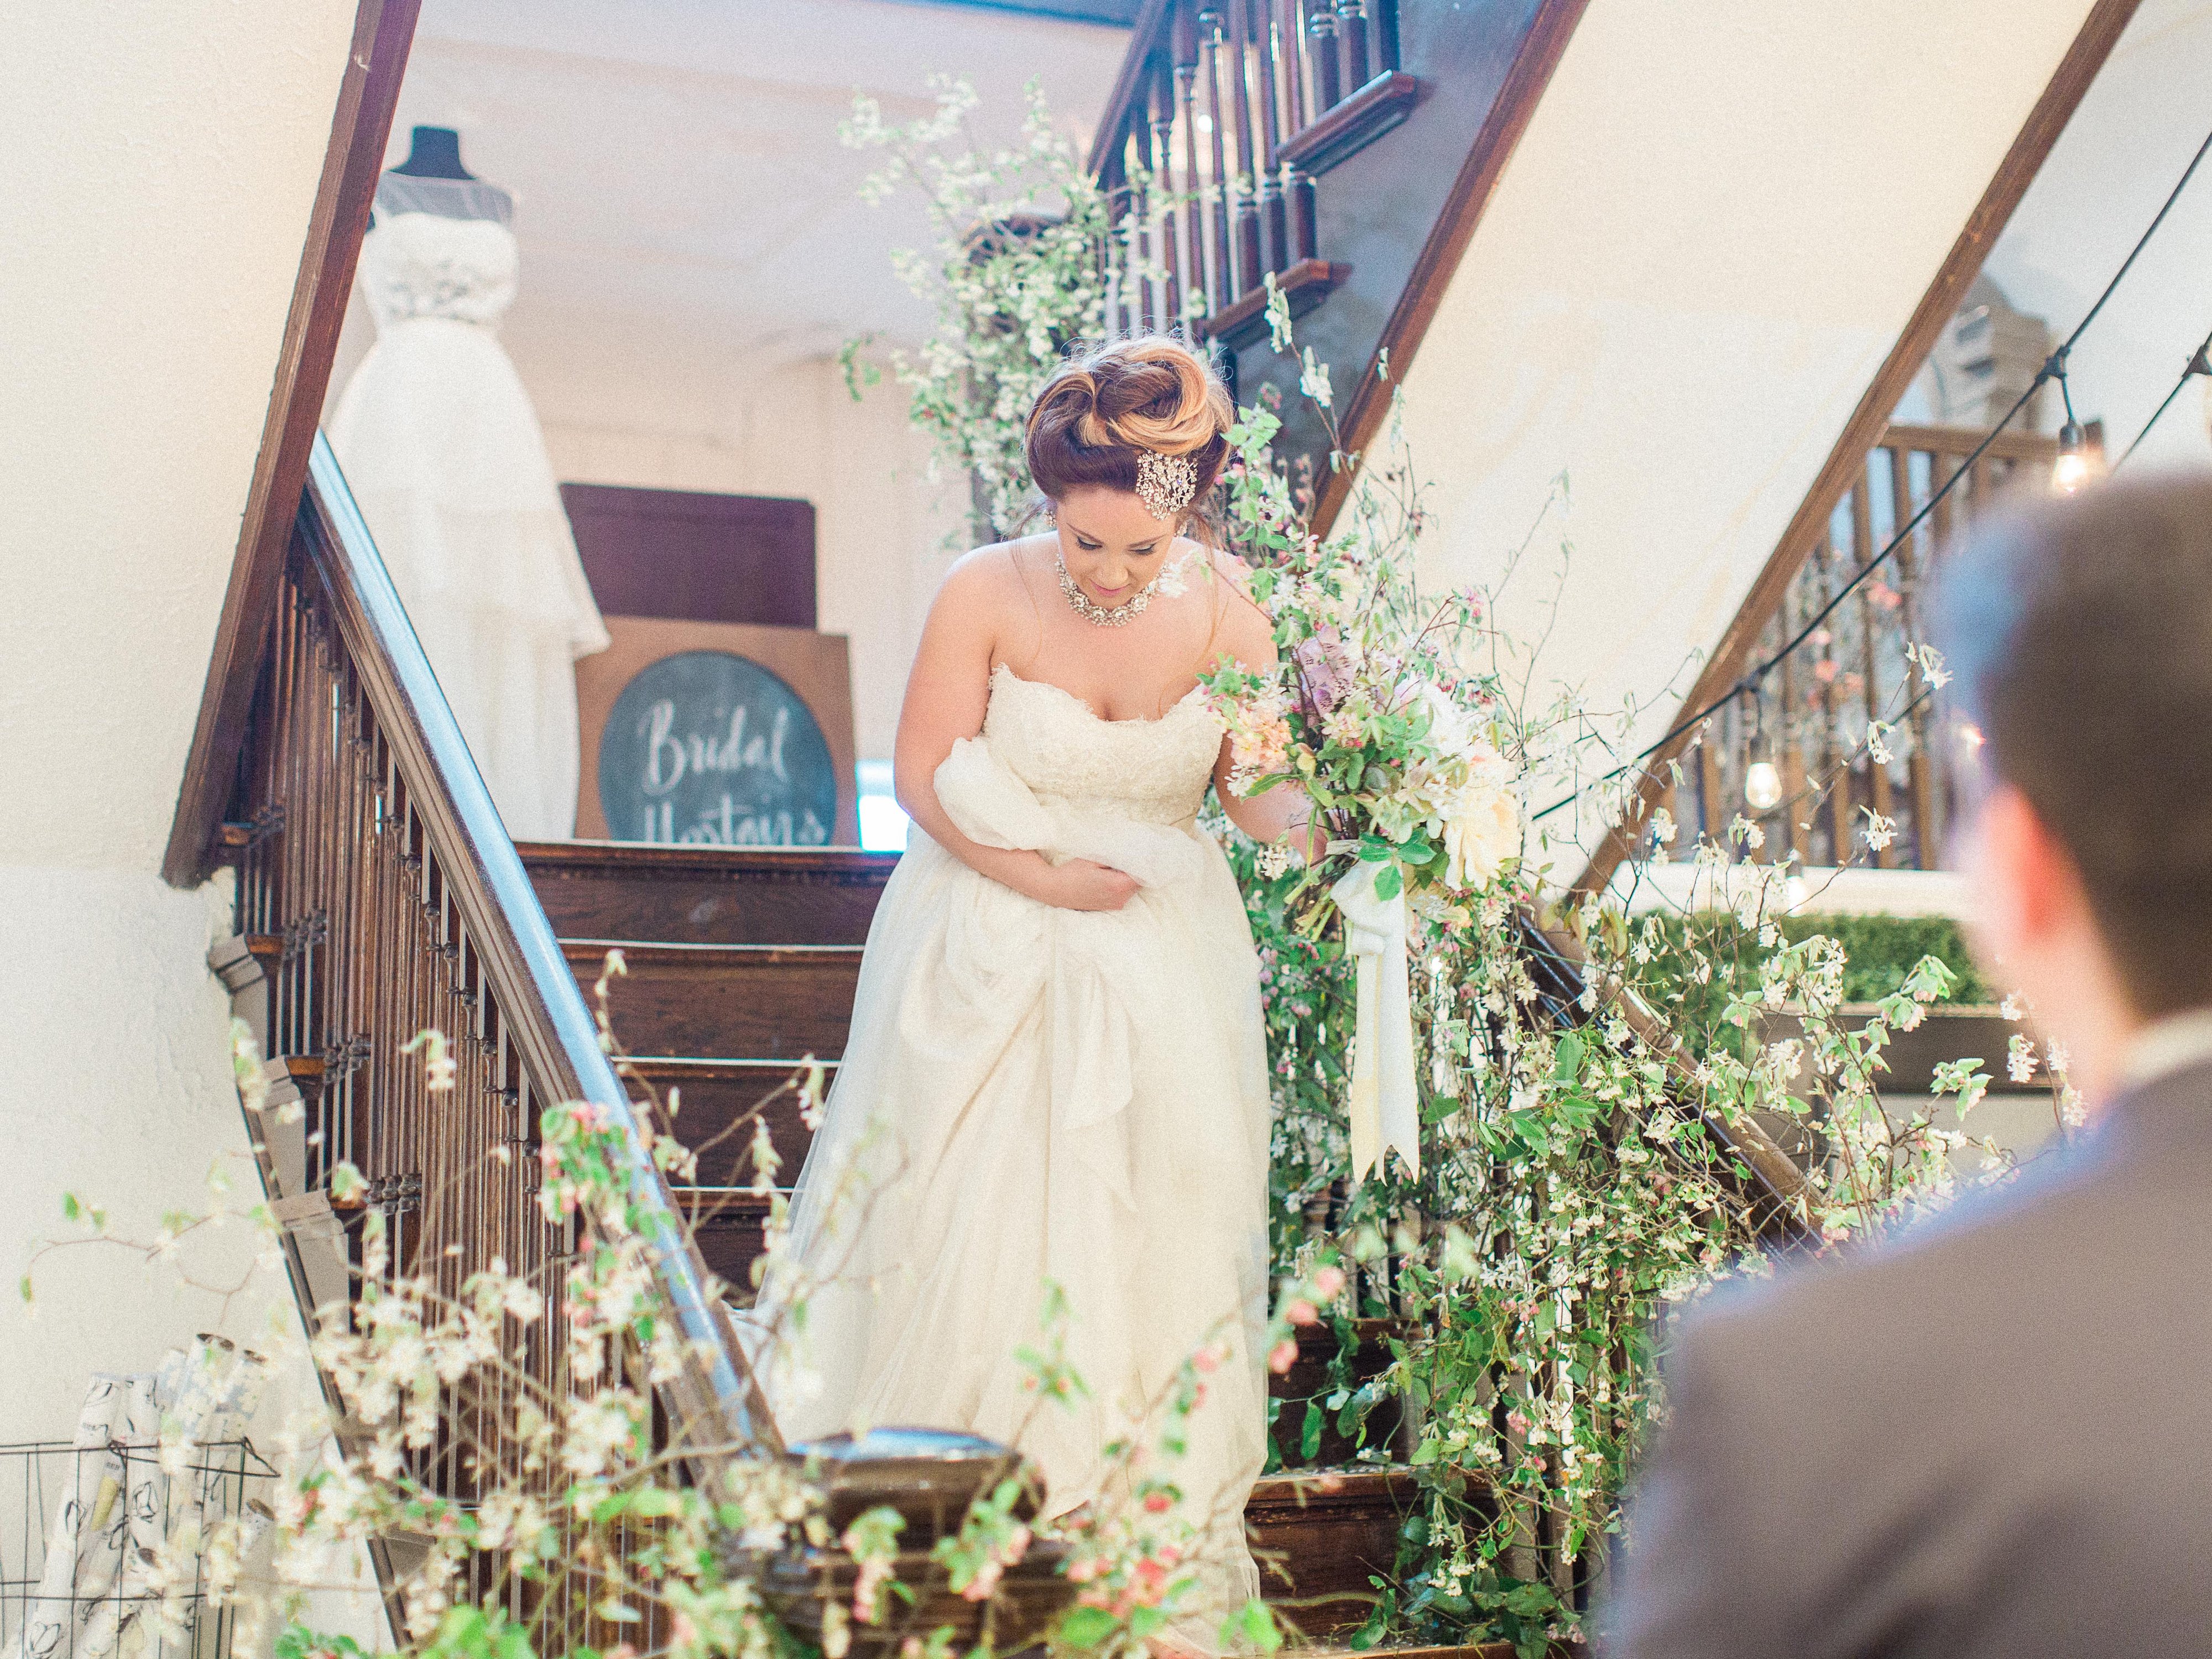 Floral Staircase Wedding | The Day's Design | Samantha James Photography